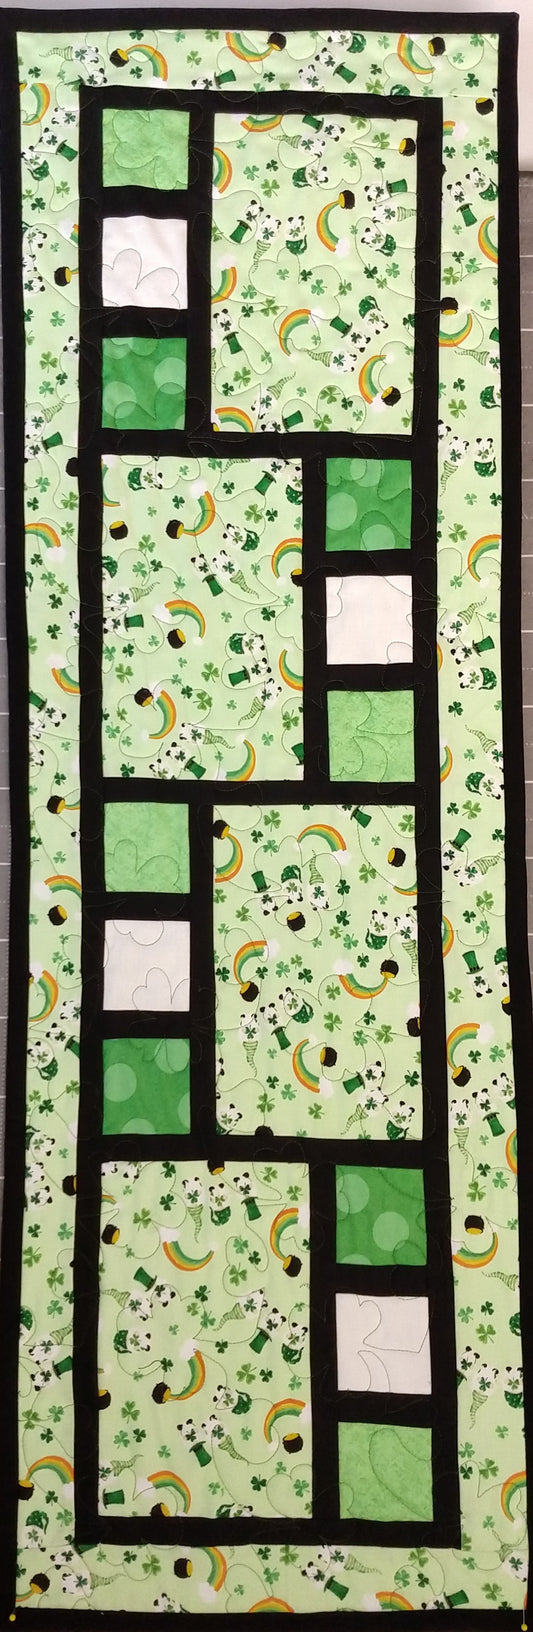 St. Patrick's Day Table Runner Kit and Cut Loose Pattern